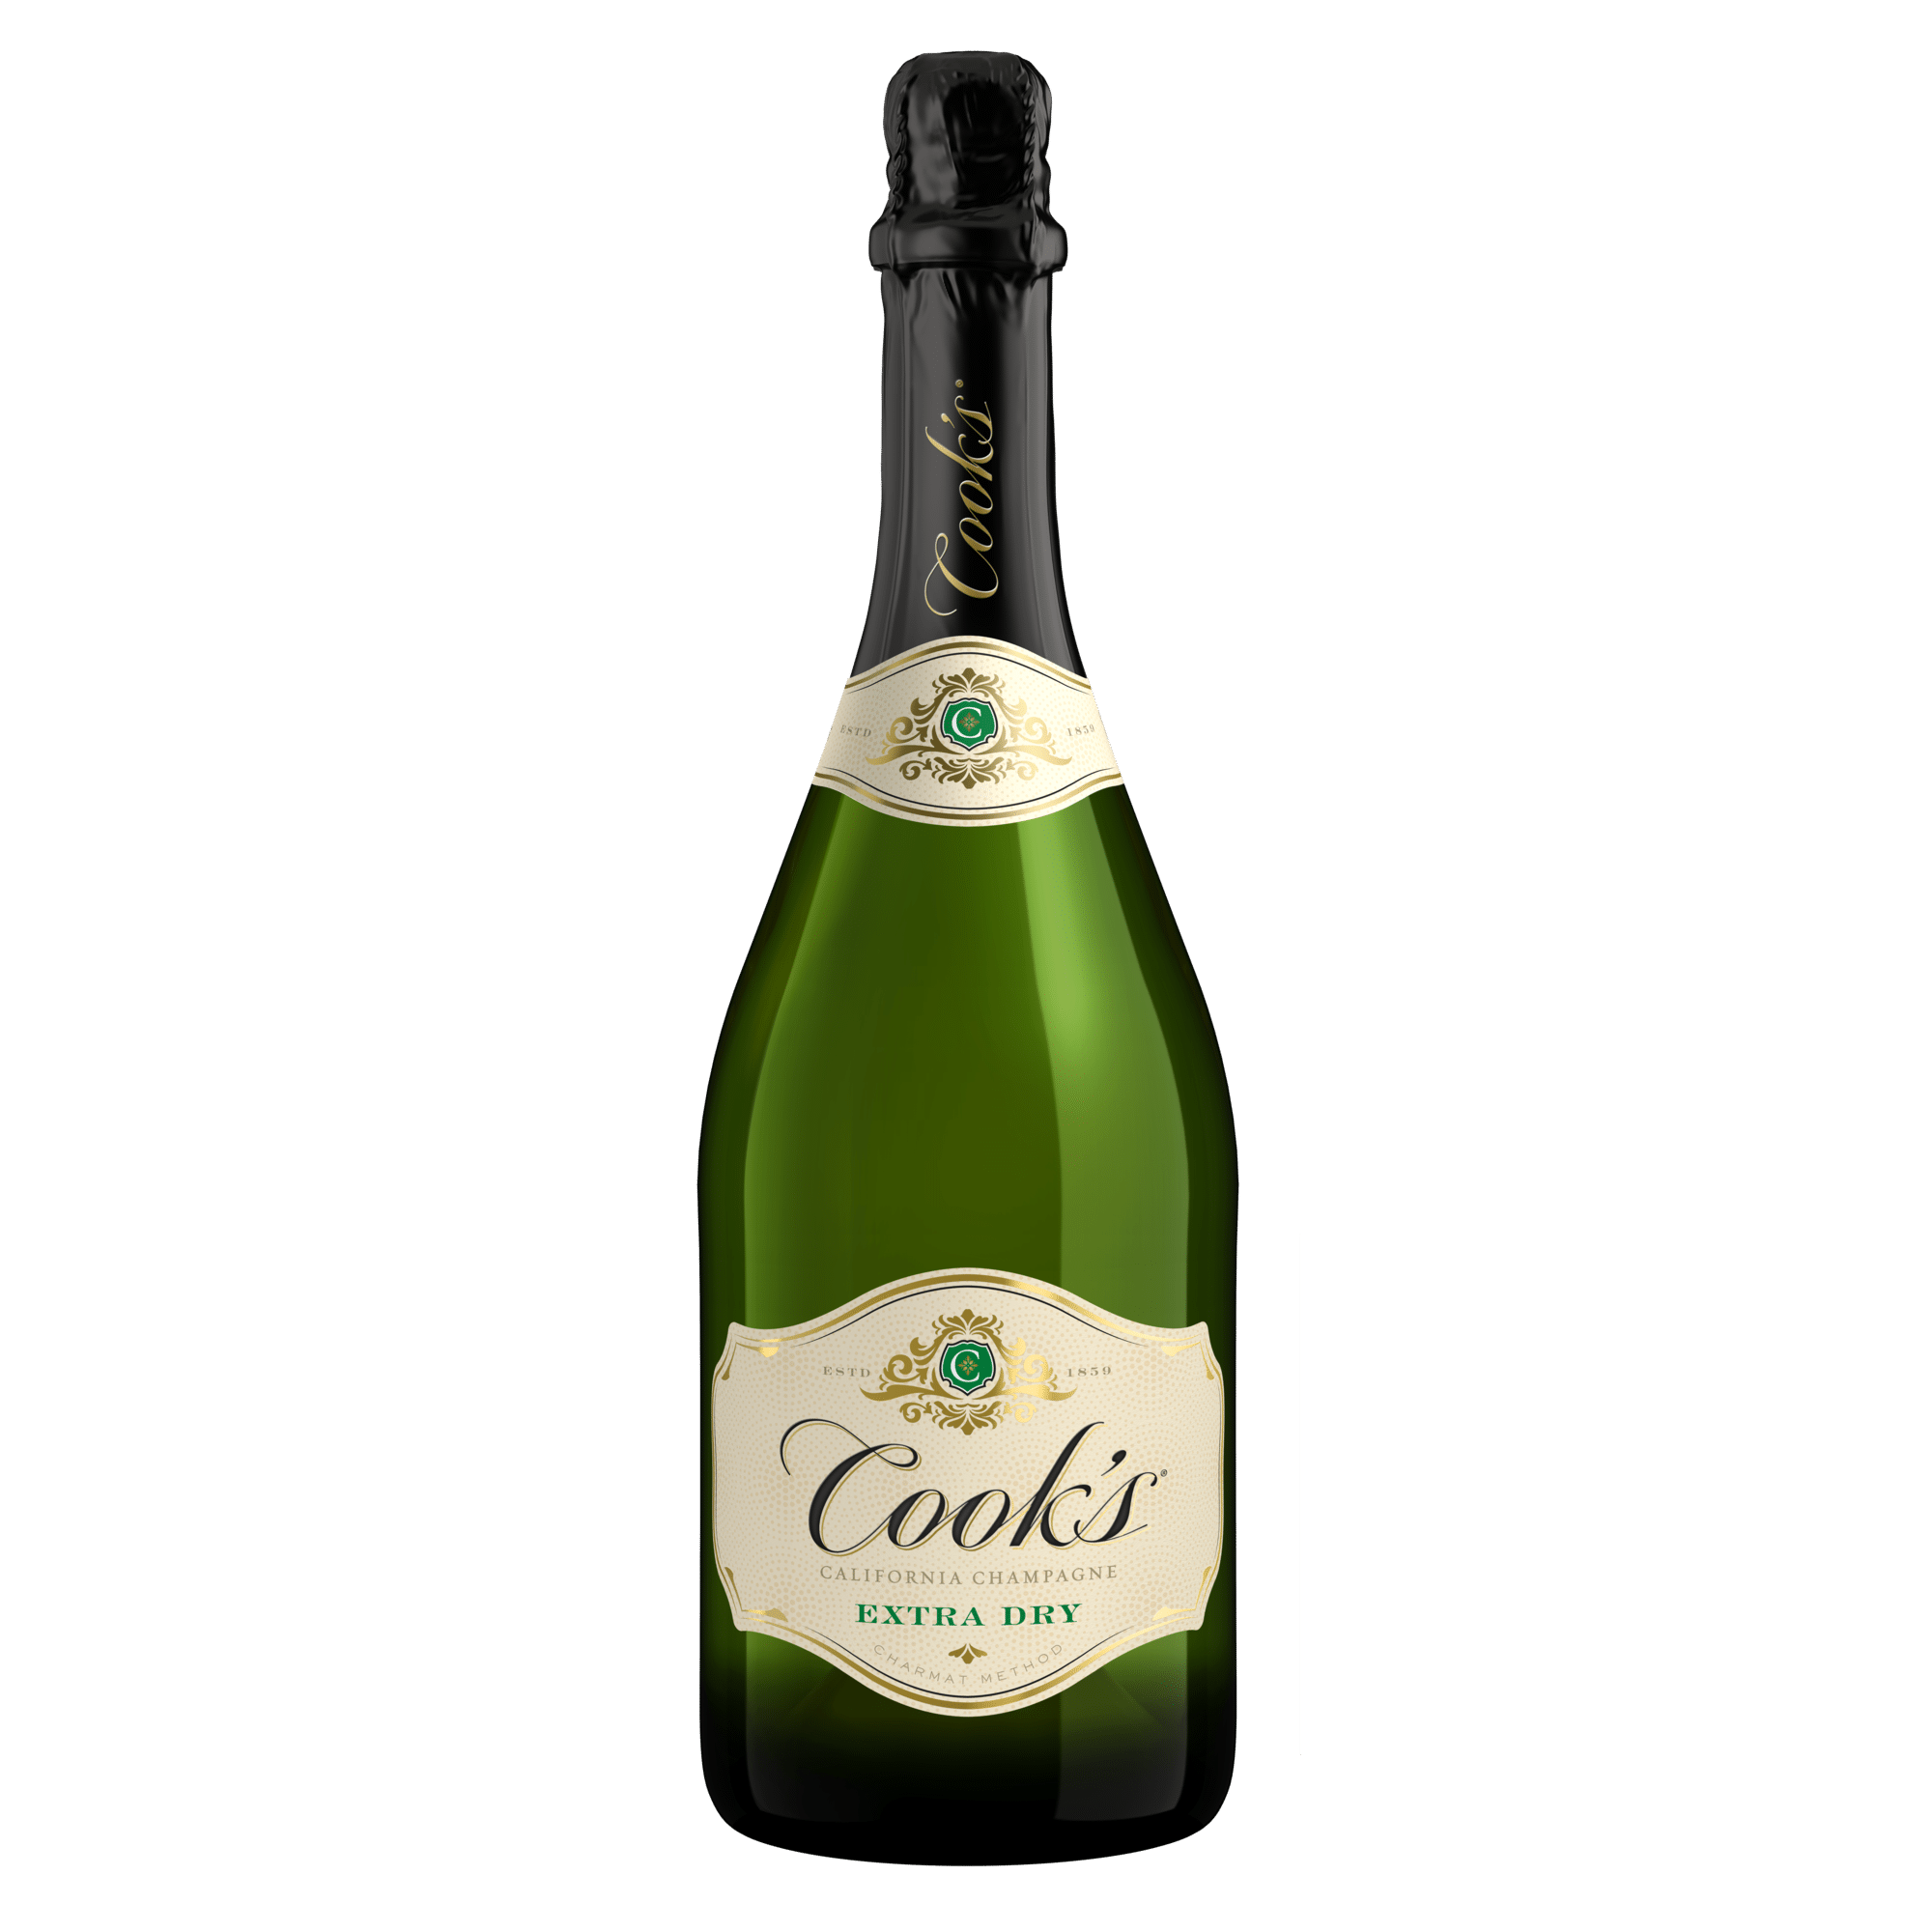 Cooks Extra Dry Champagne - Barbank